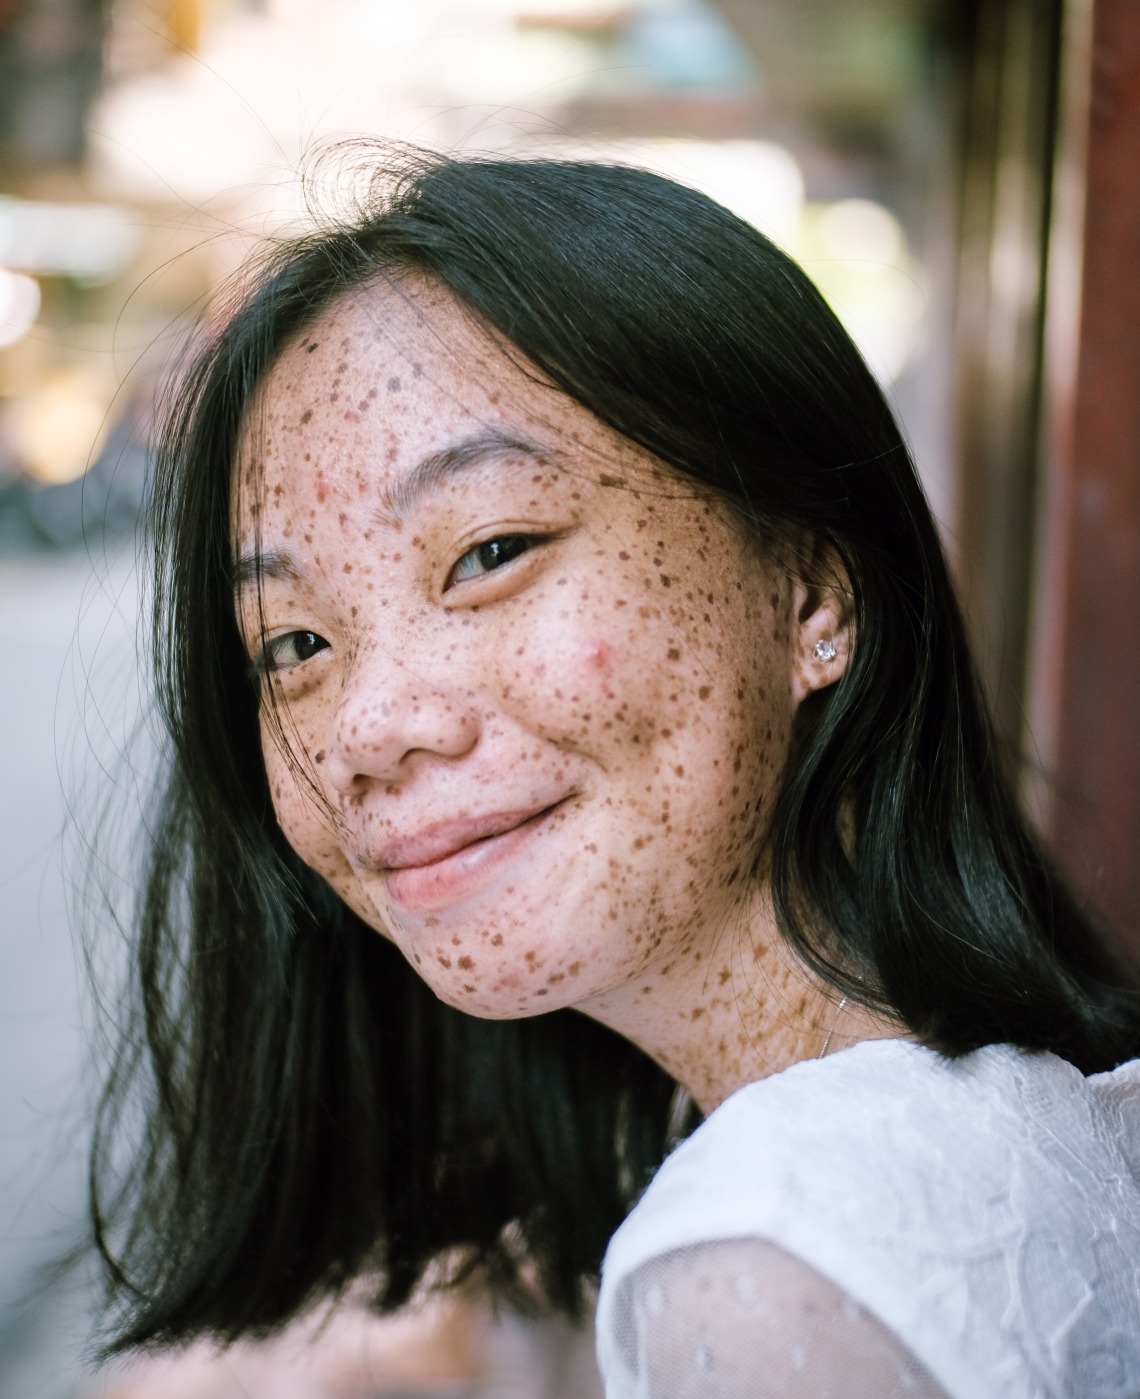 person with freckles smiling